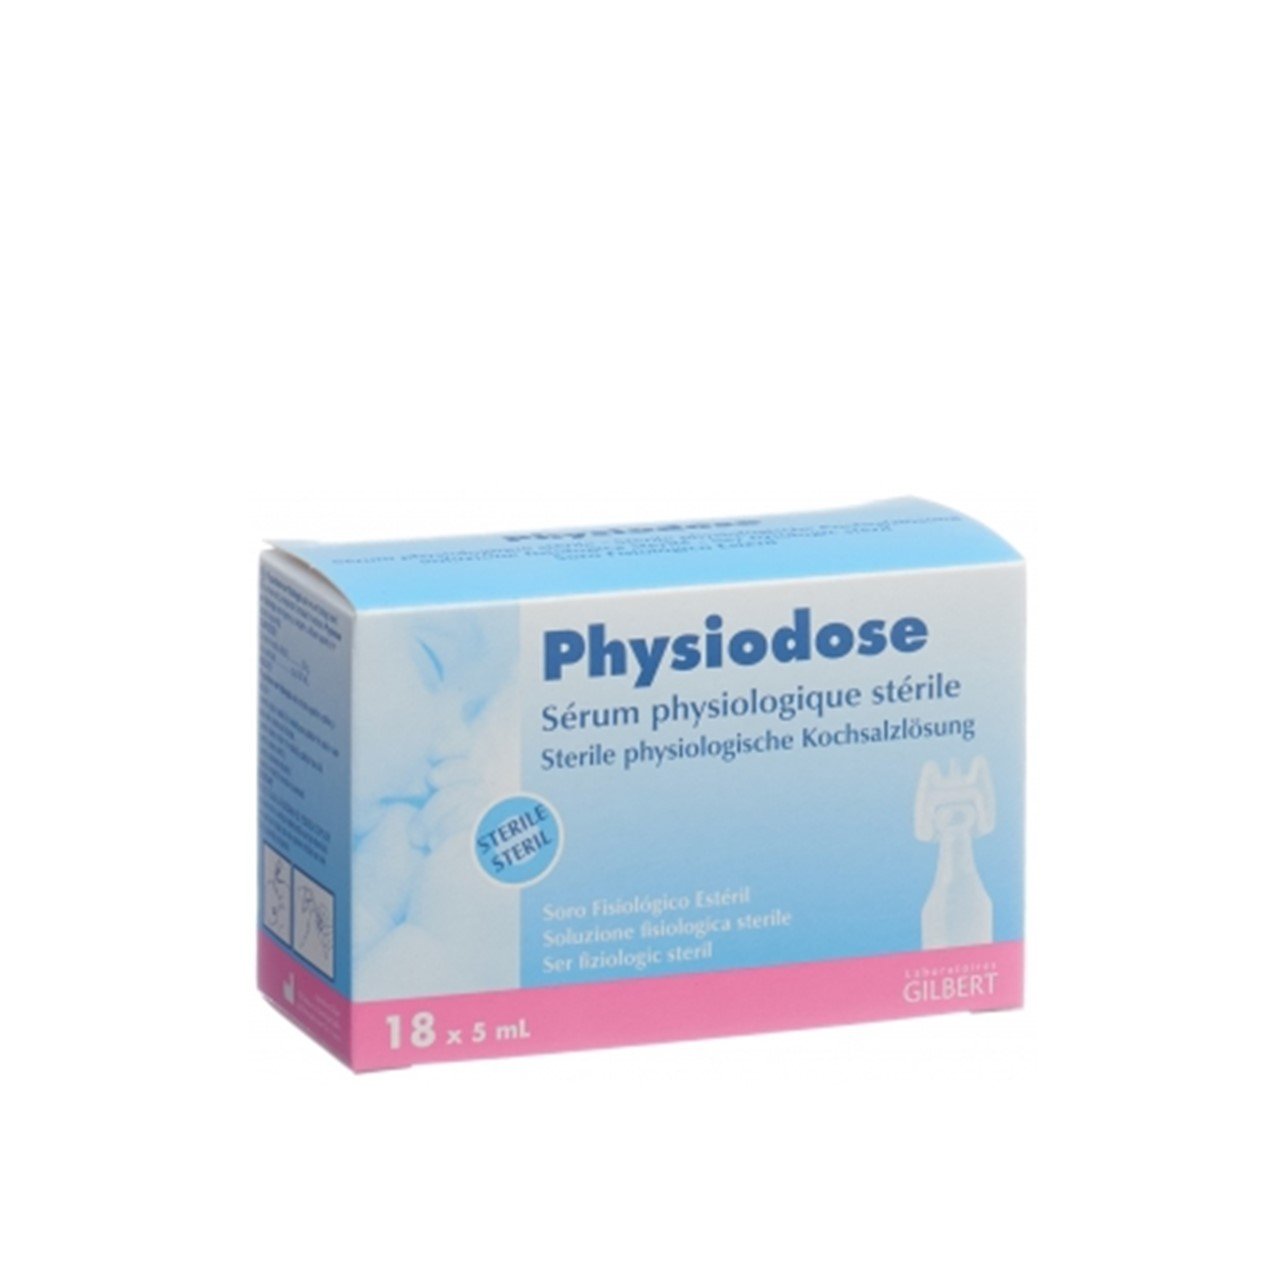 3 Pack Gilbert Physiodose Sterile Physiological Serum 40 Single Doses For Baby 